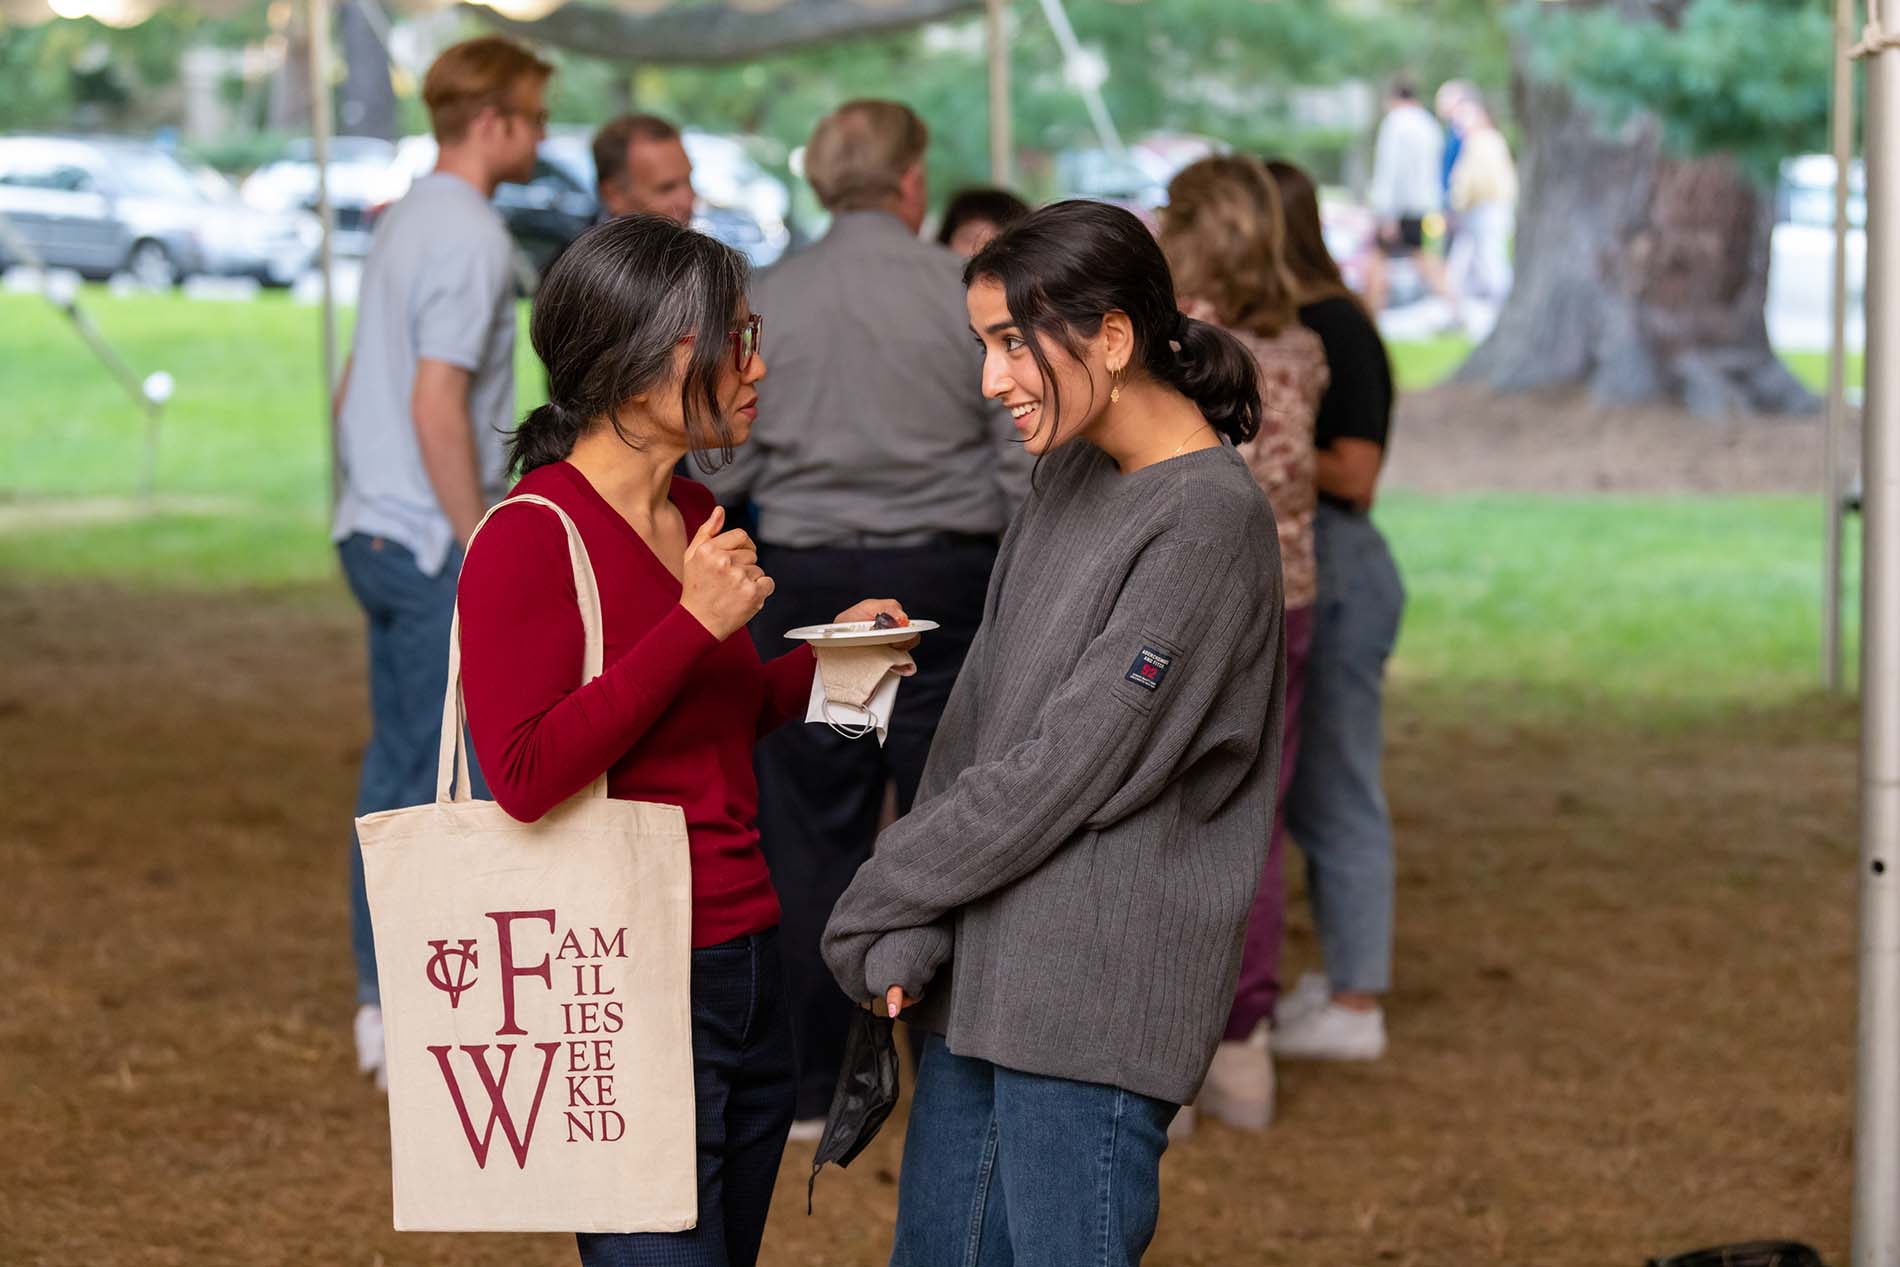 A parent and a child talk to each other while standing under a large event tent, face to face. The parent, on the left, has long, straight, black hair in a ponytail, glasses, a red shirt, and a bag with the text “Families Weekend” on it. The person on the right has long, black hair in a ponytail and a gray sweater. Blurred figures are visible in the background.